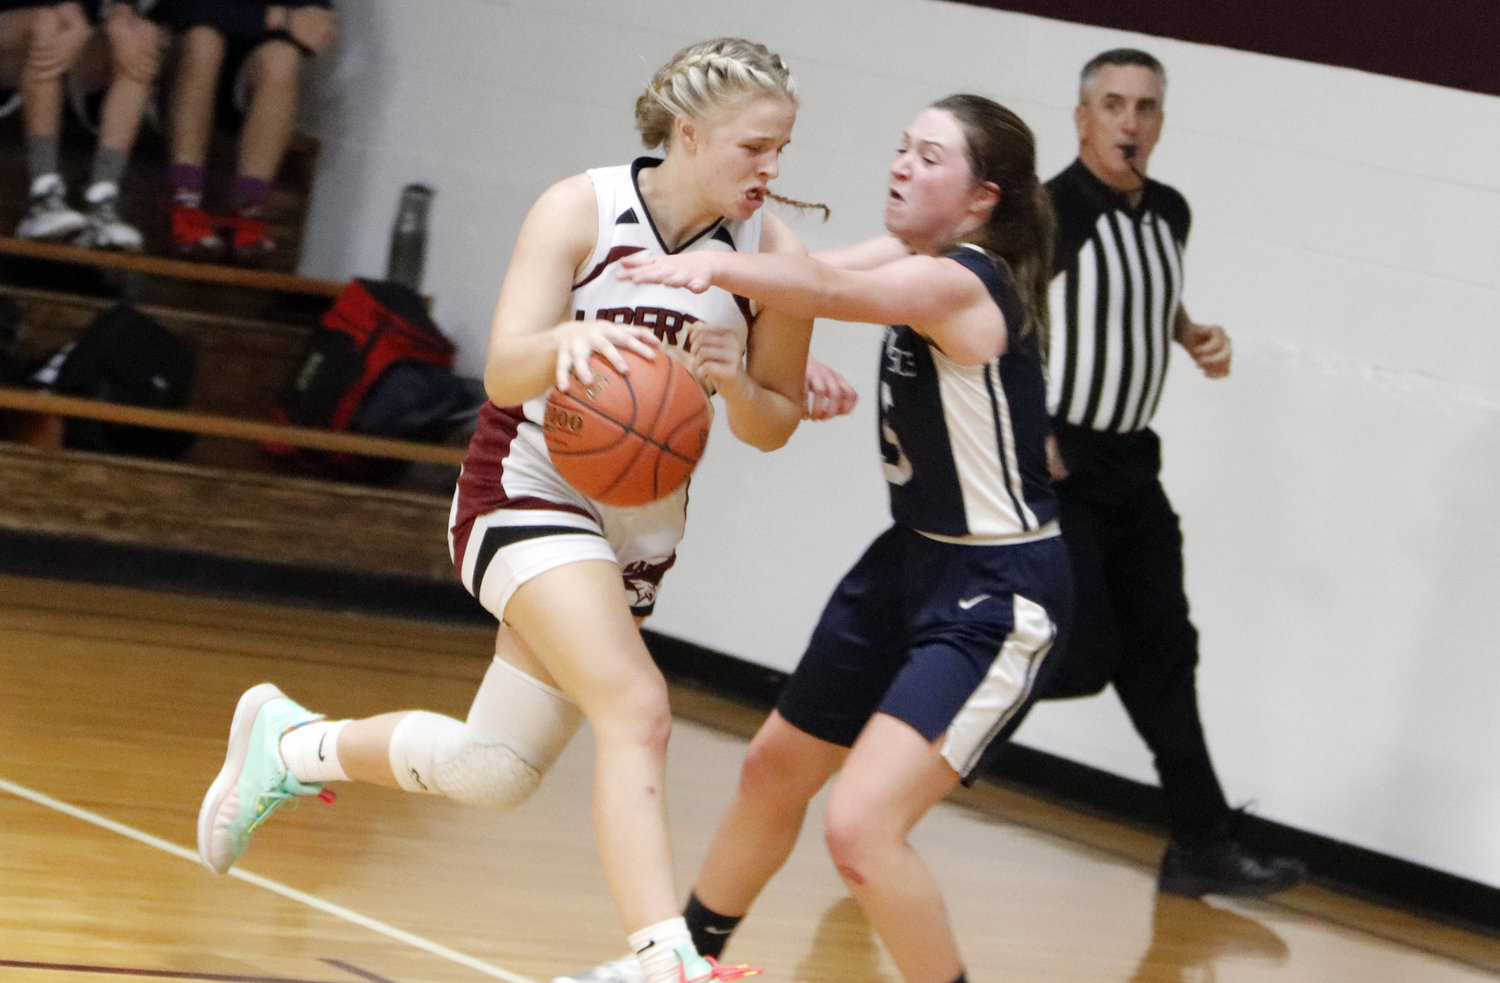 Alli Meyer (left) drives to the basket during a game earlier this season.